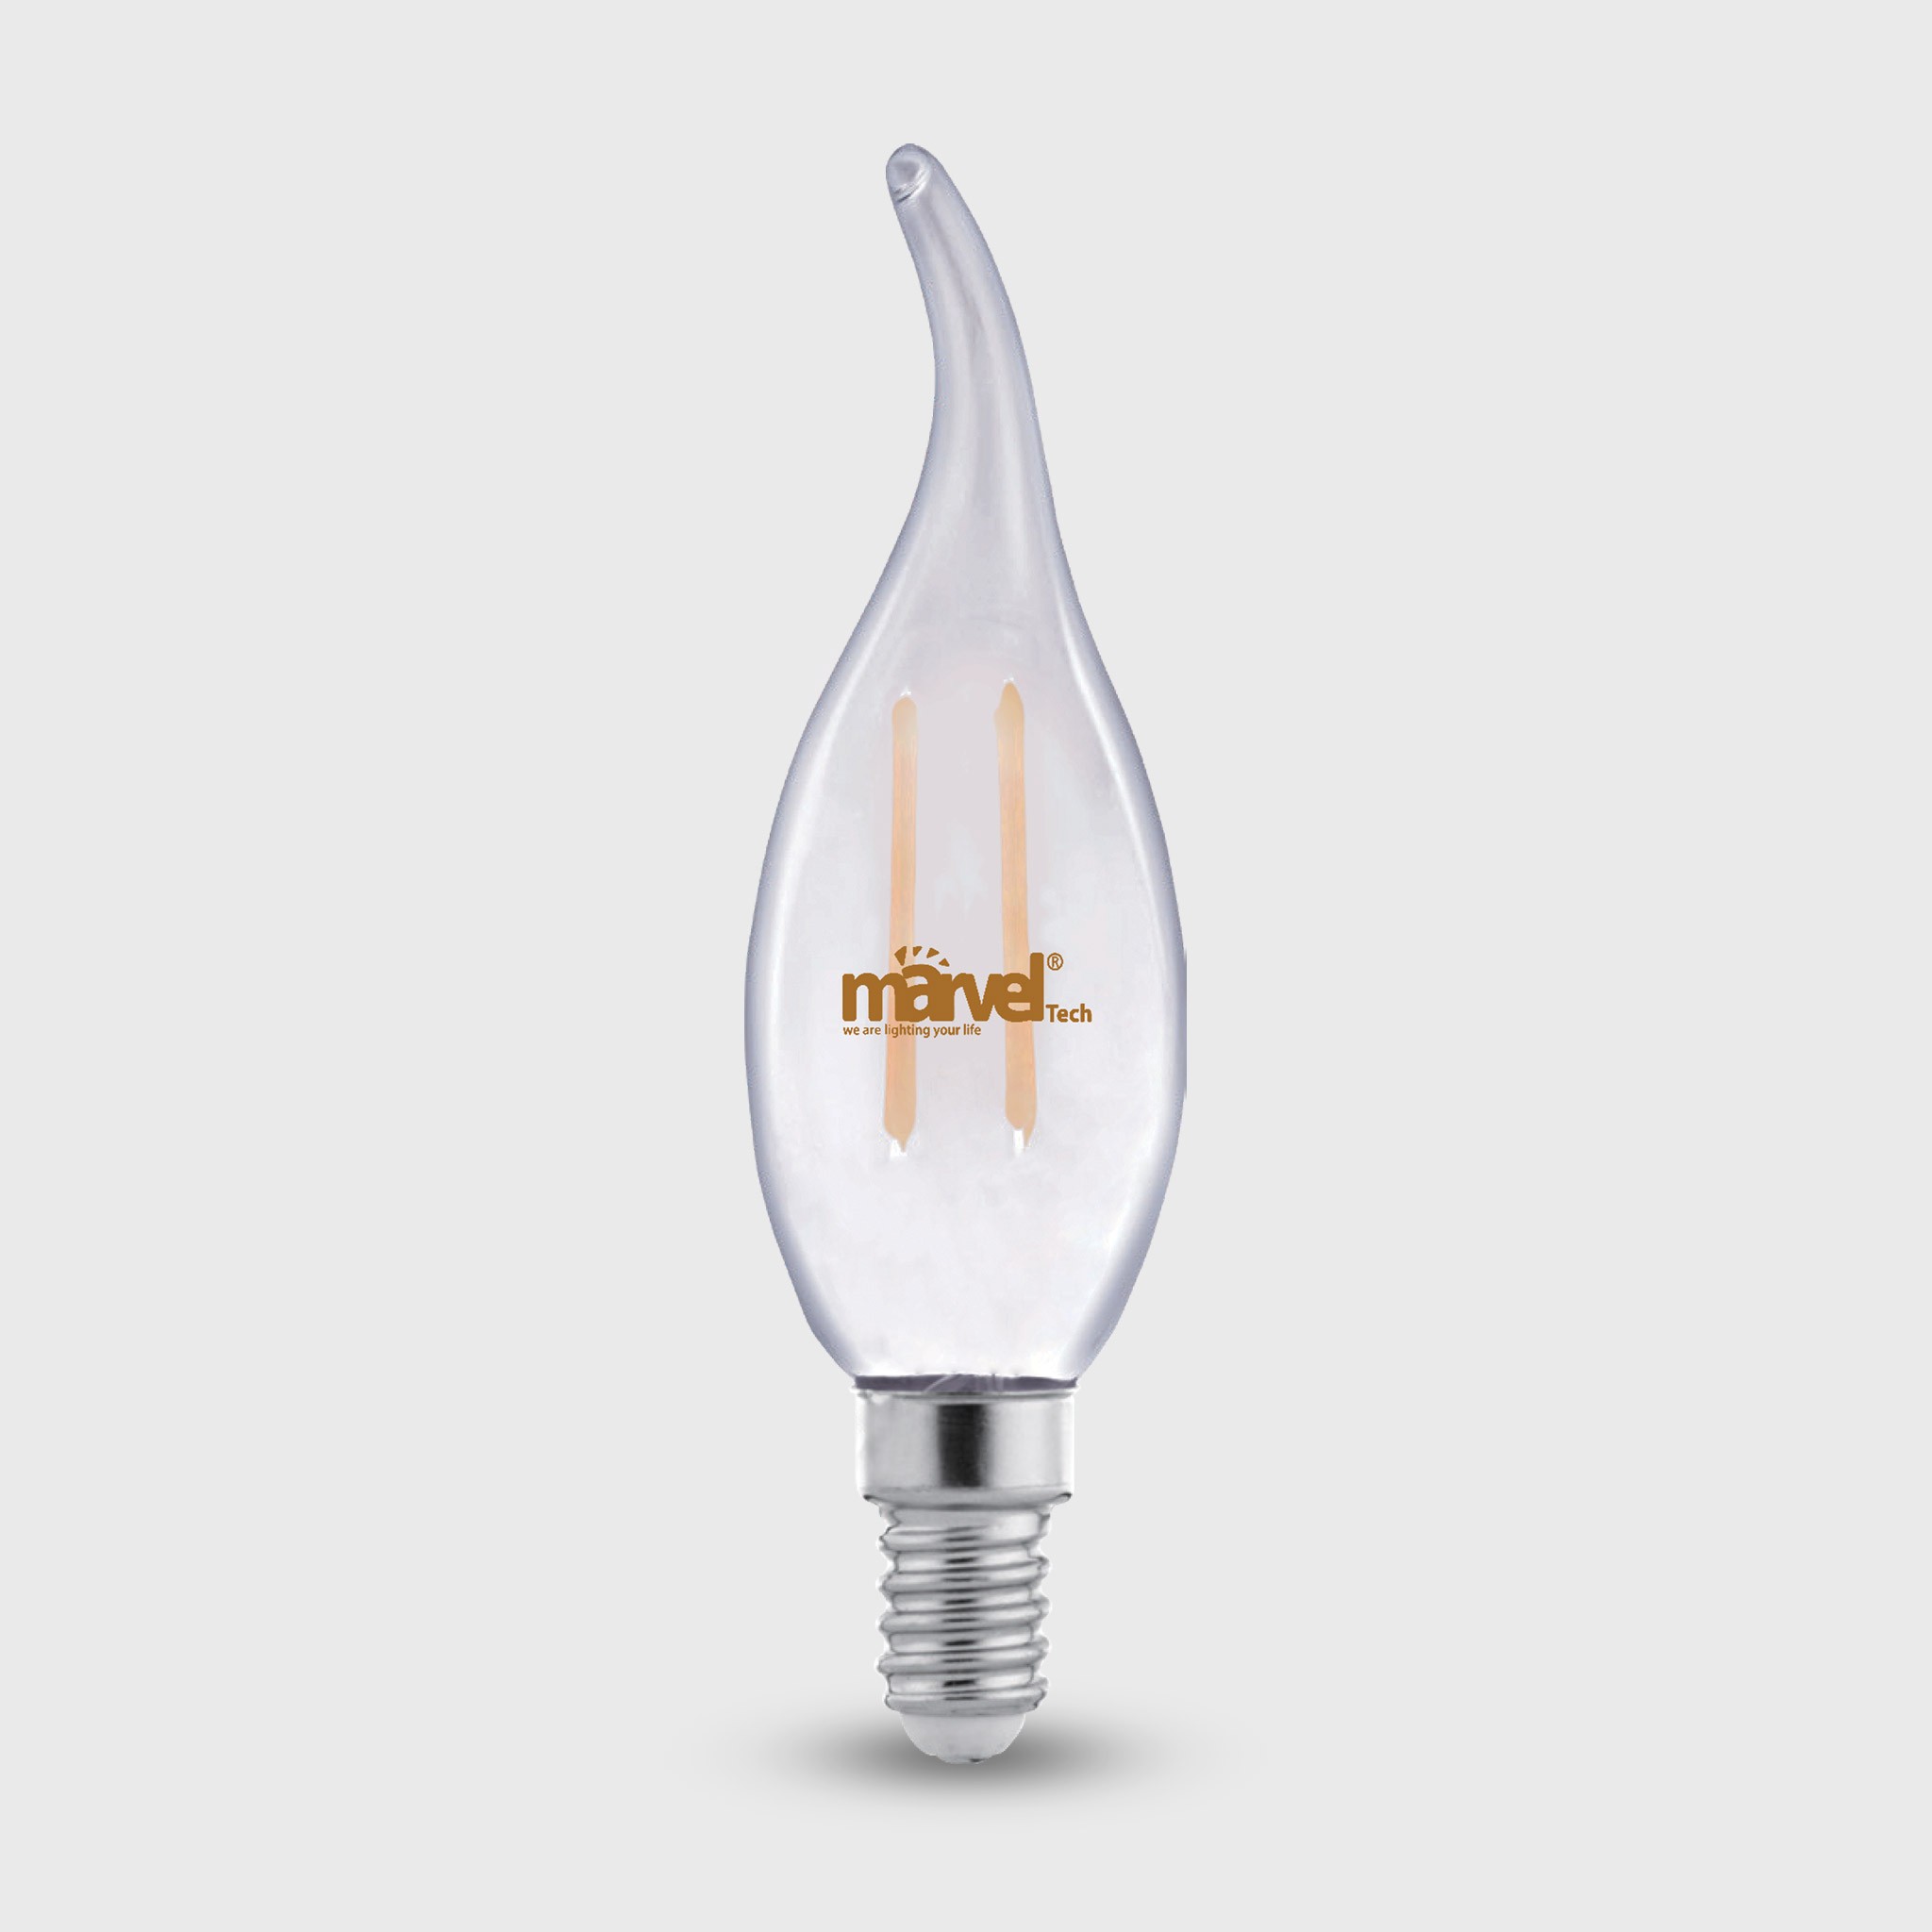 MS-22306 Filament Candle Light Frosted 4W WW